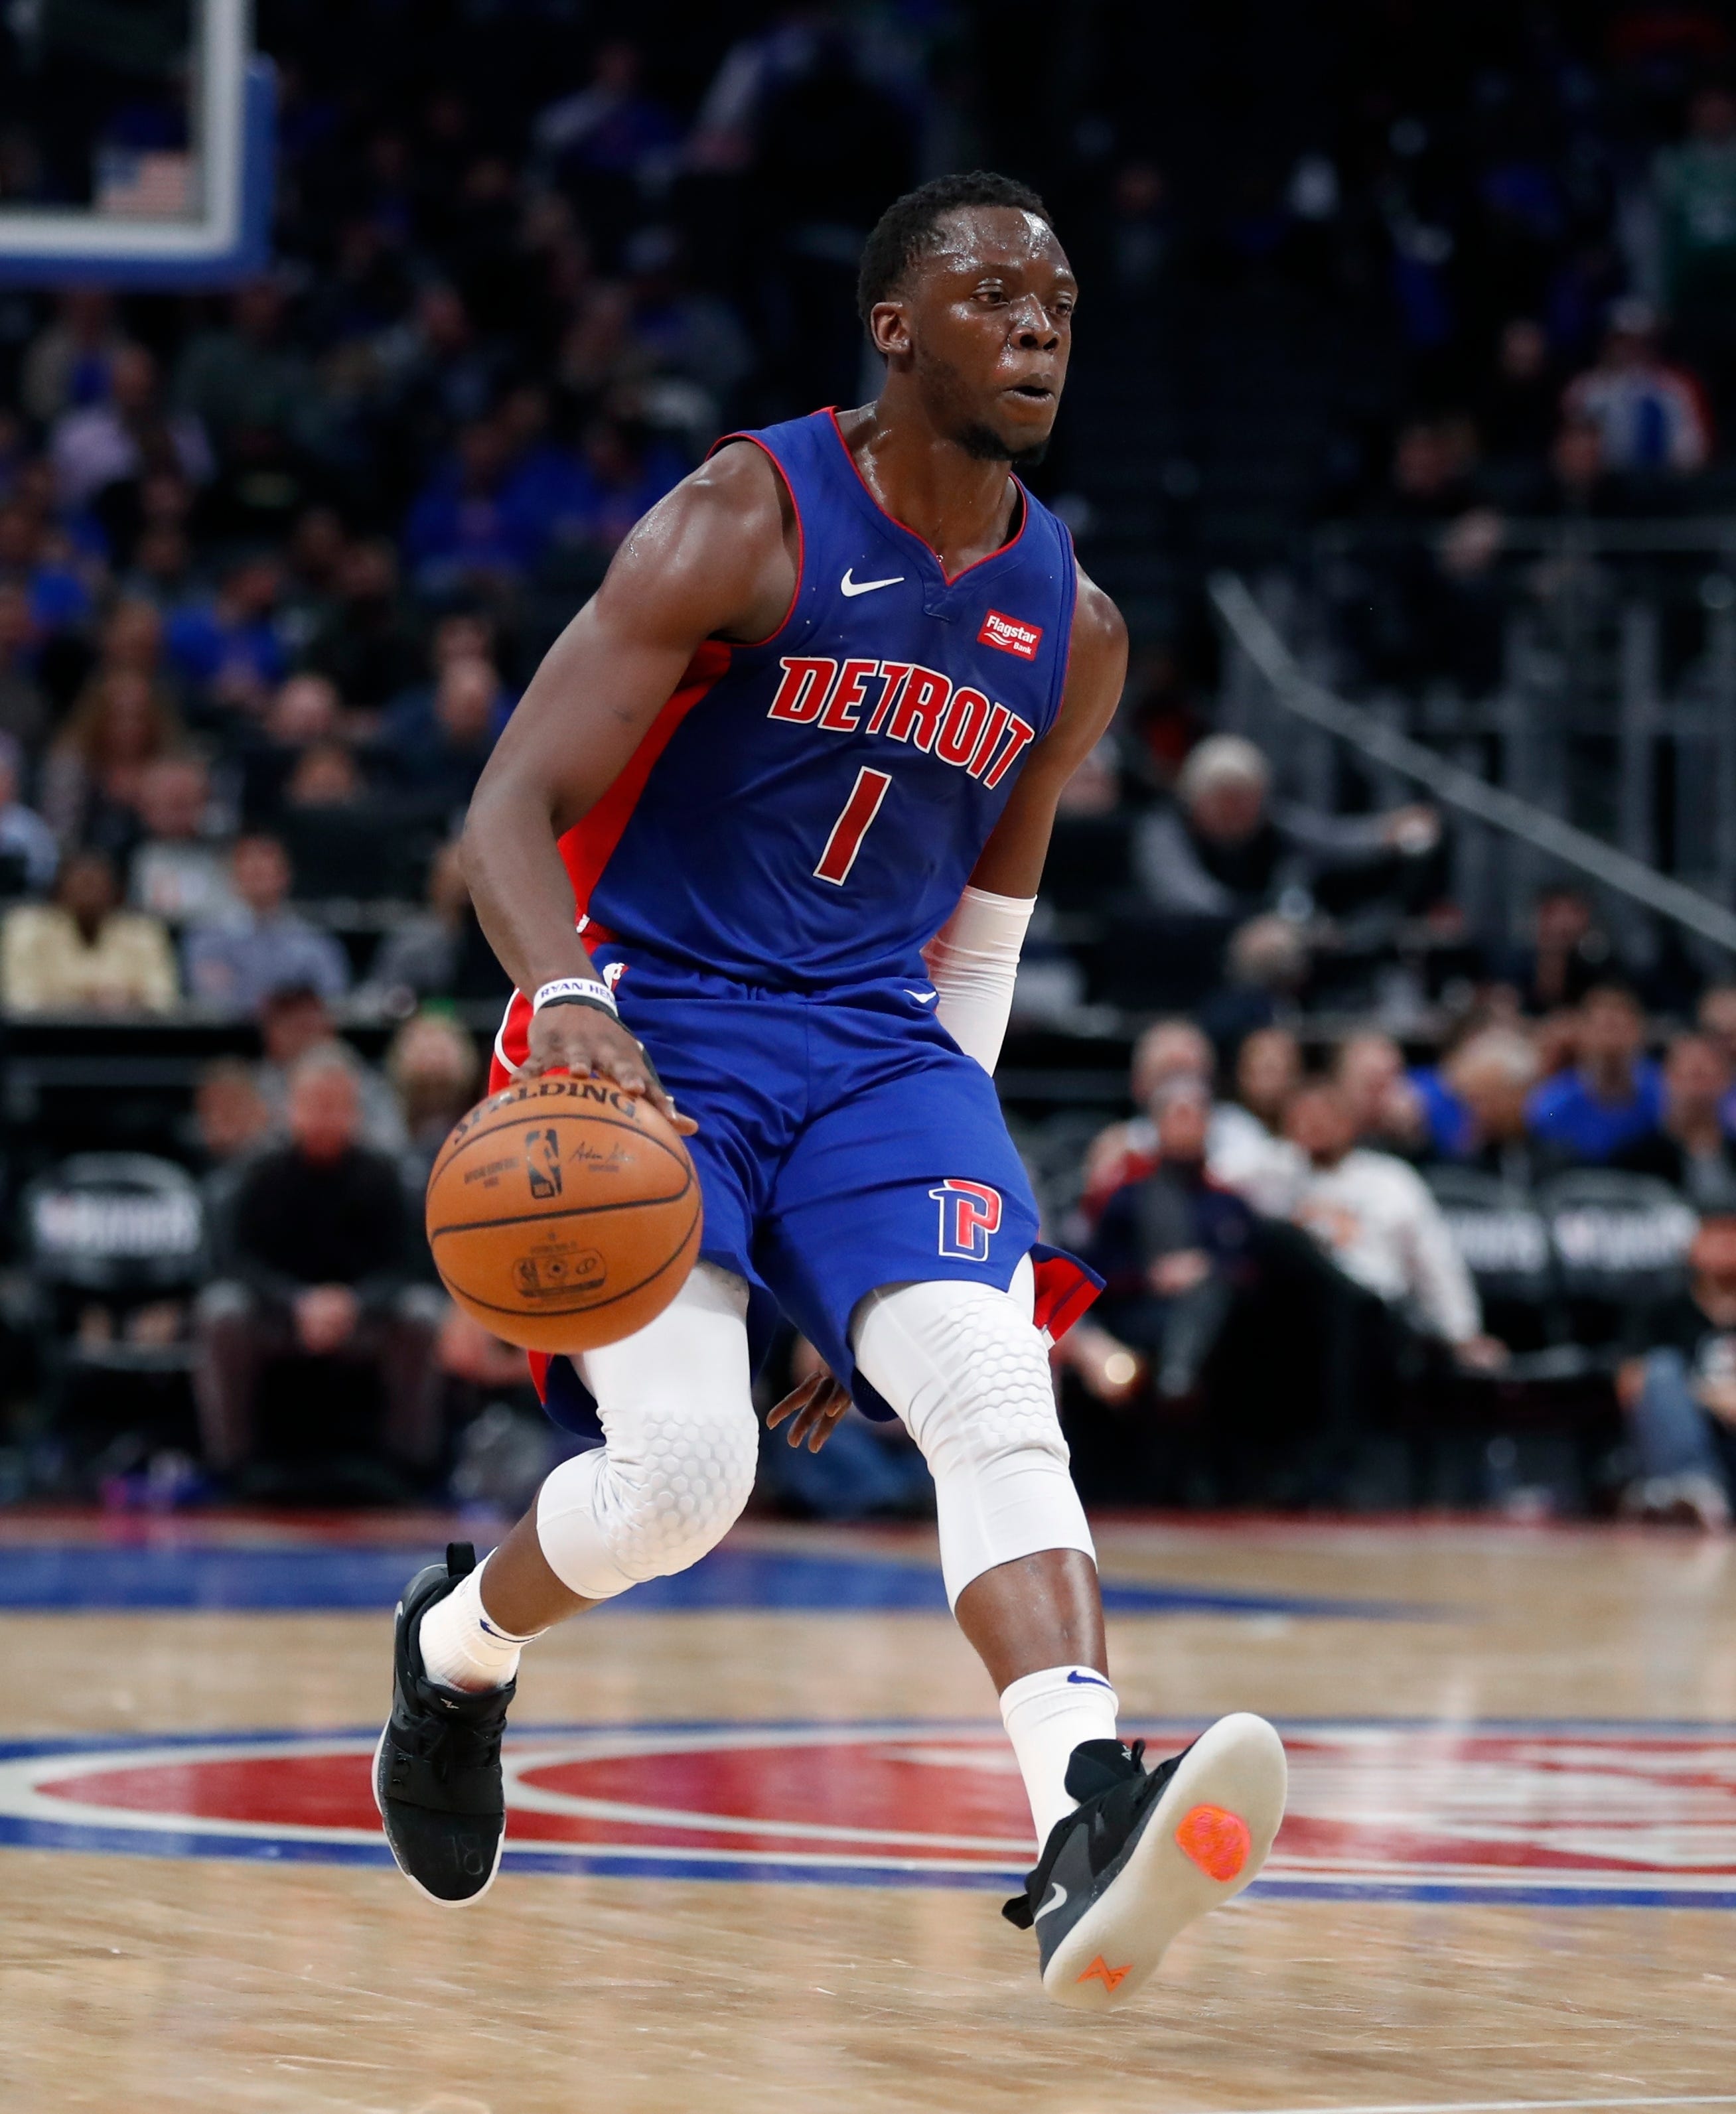 3. PG Reggie Jackson, age 29: As he enters the final year of his contract, Jackson could be a huge asset if he returns fully healthy and can play at the same level as the second half of last season. A good start will increase his value ahead of the trade deadline, which could mean receiving a higher-impact player in return for his expiring contract, depending on the market in January.